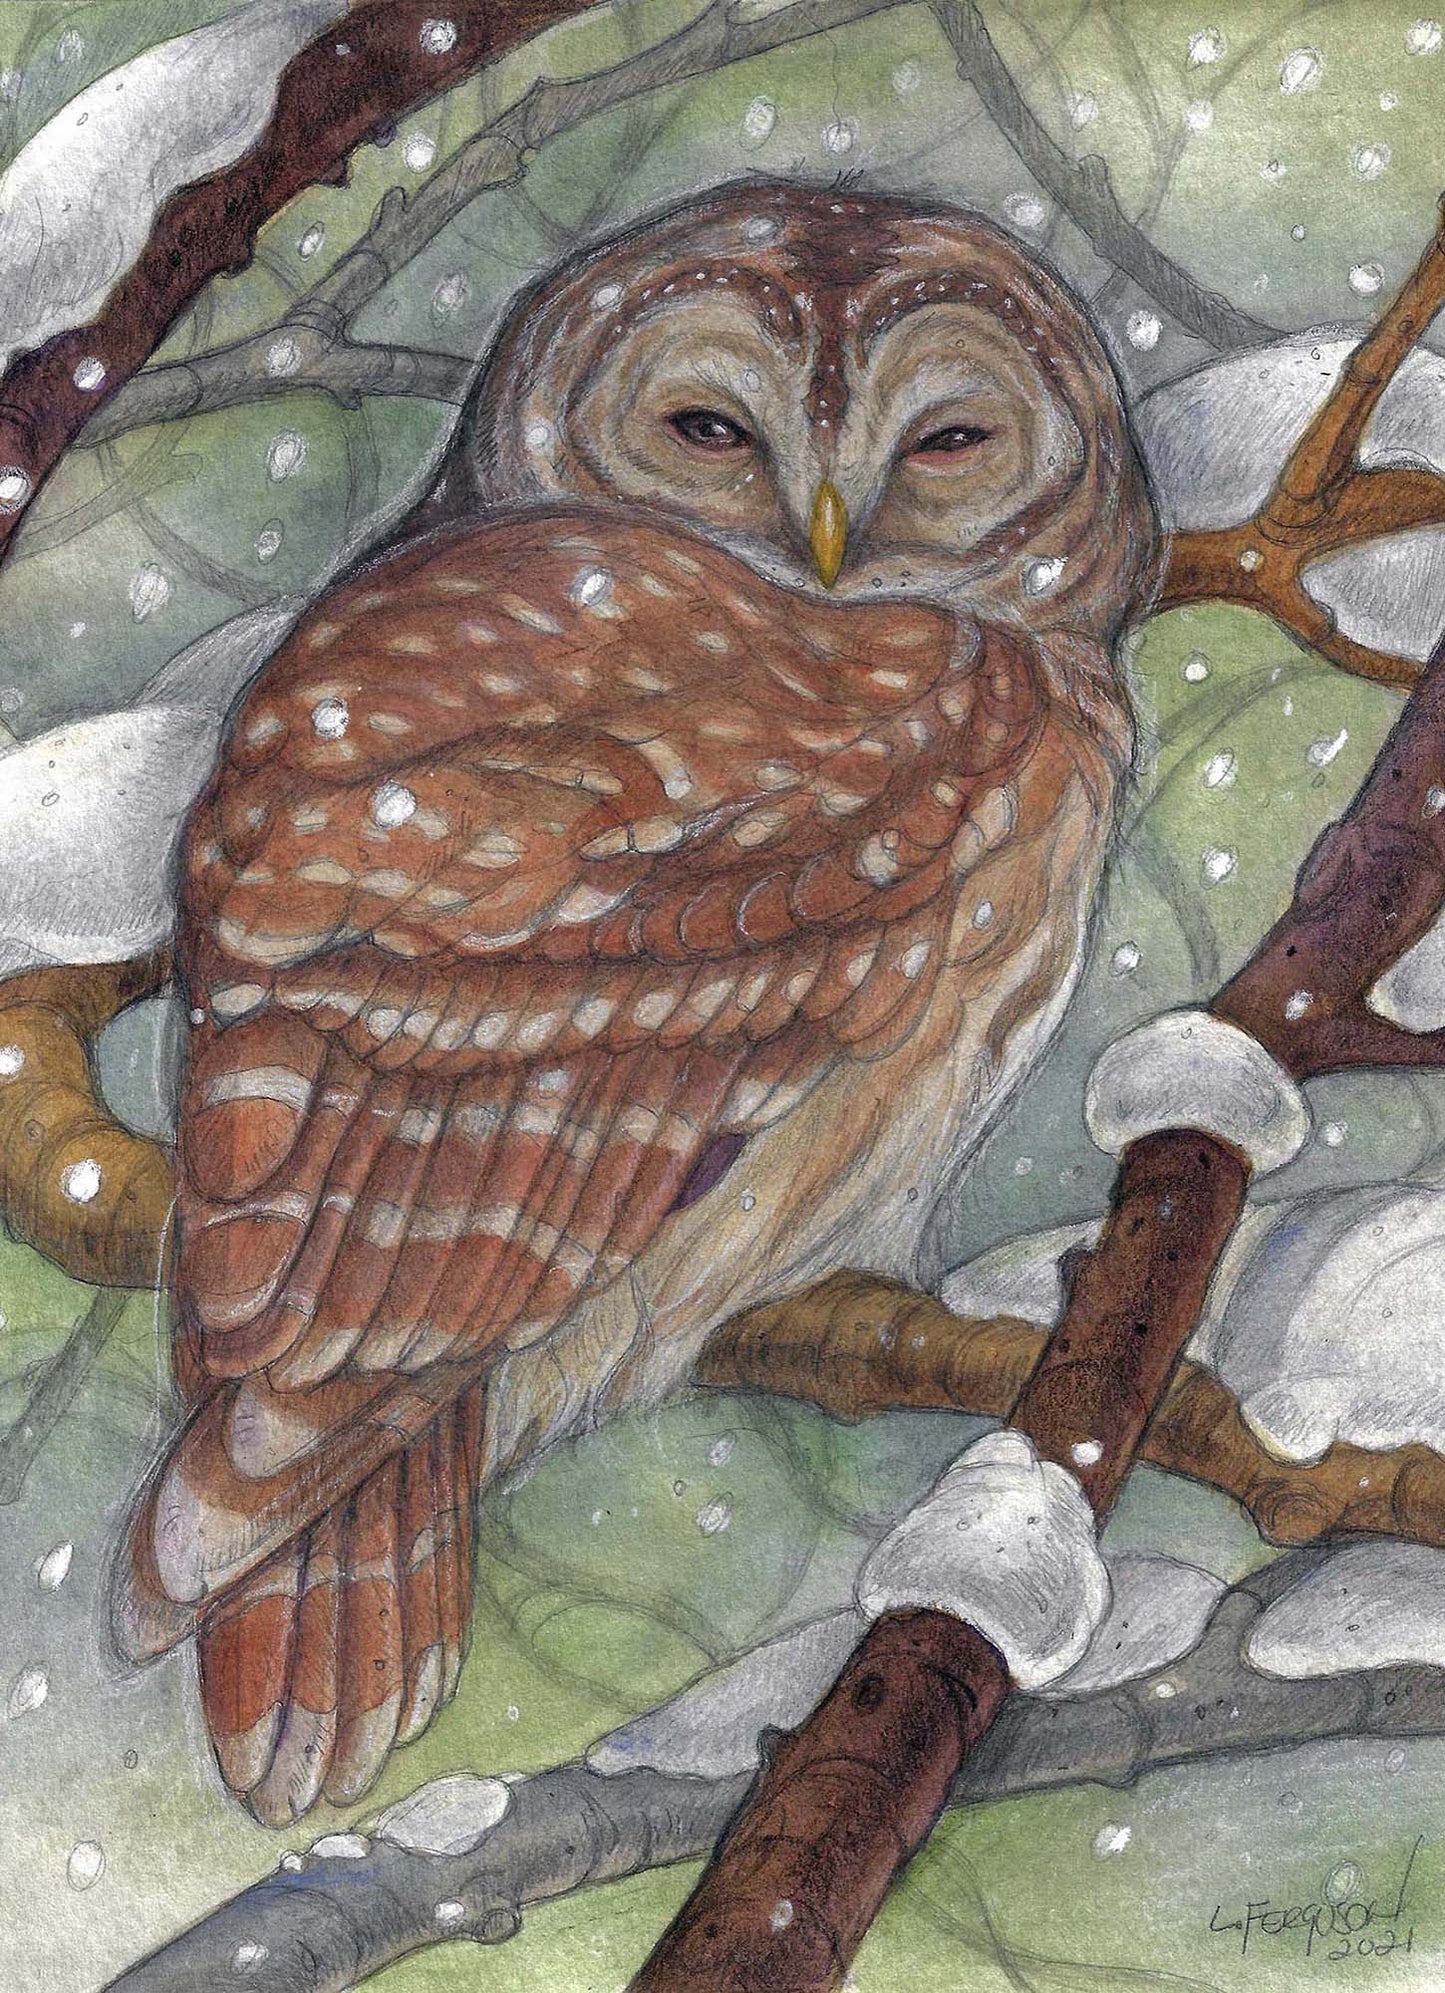 The Whisper Of Winter-Greeting Card